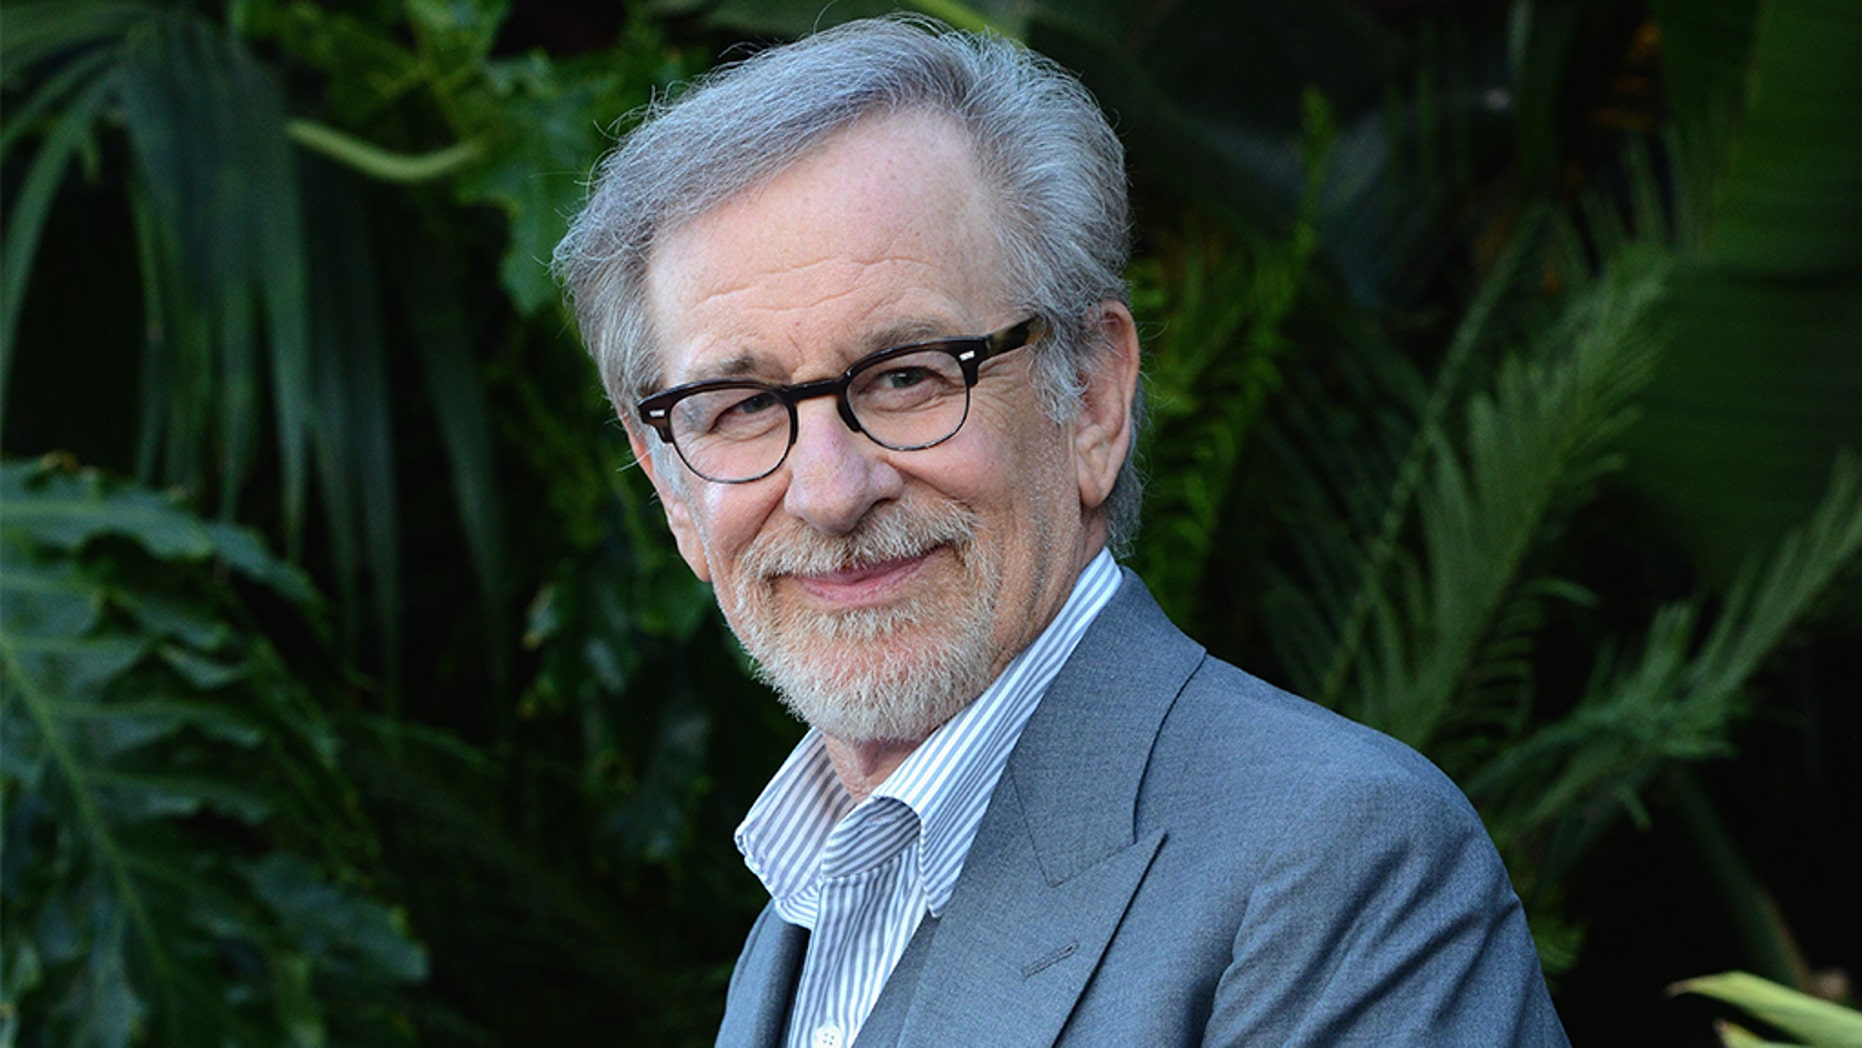 Steven Spielberg has launched Netflix and other streamers in a recent acceptance speech.